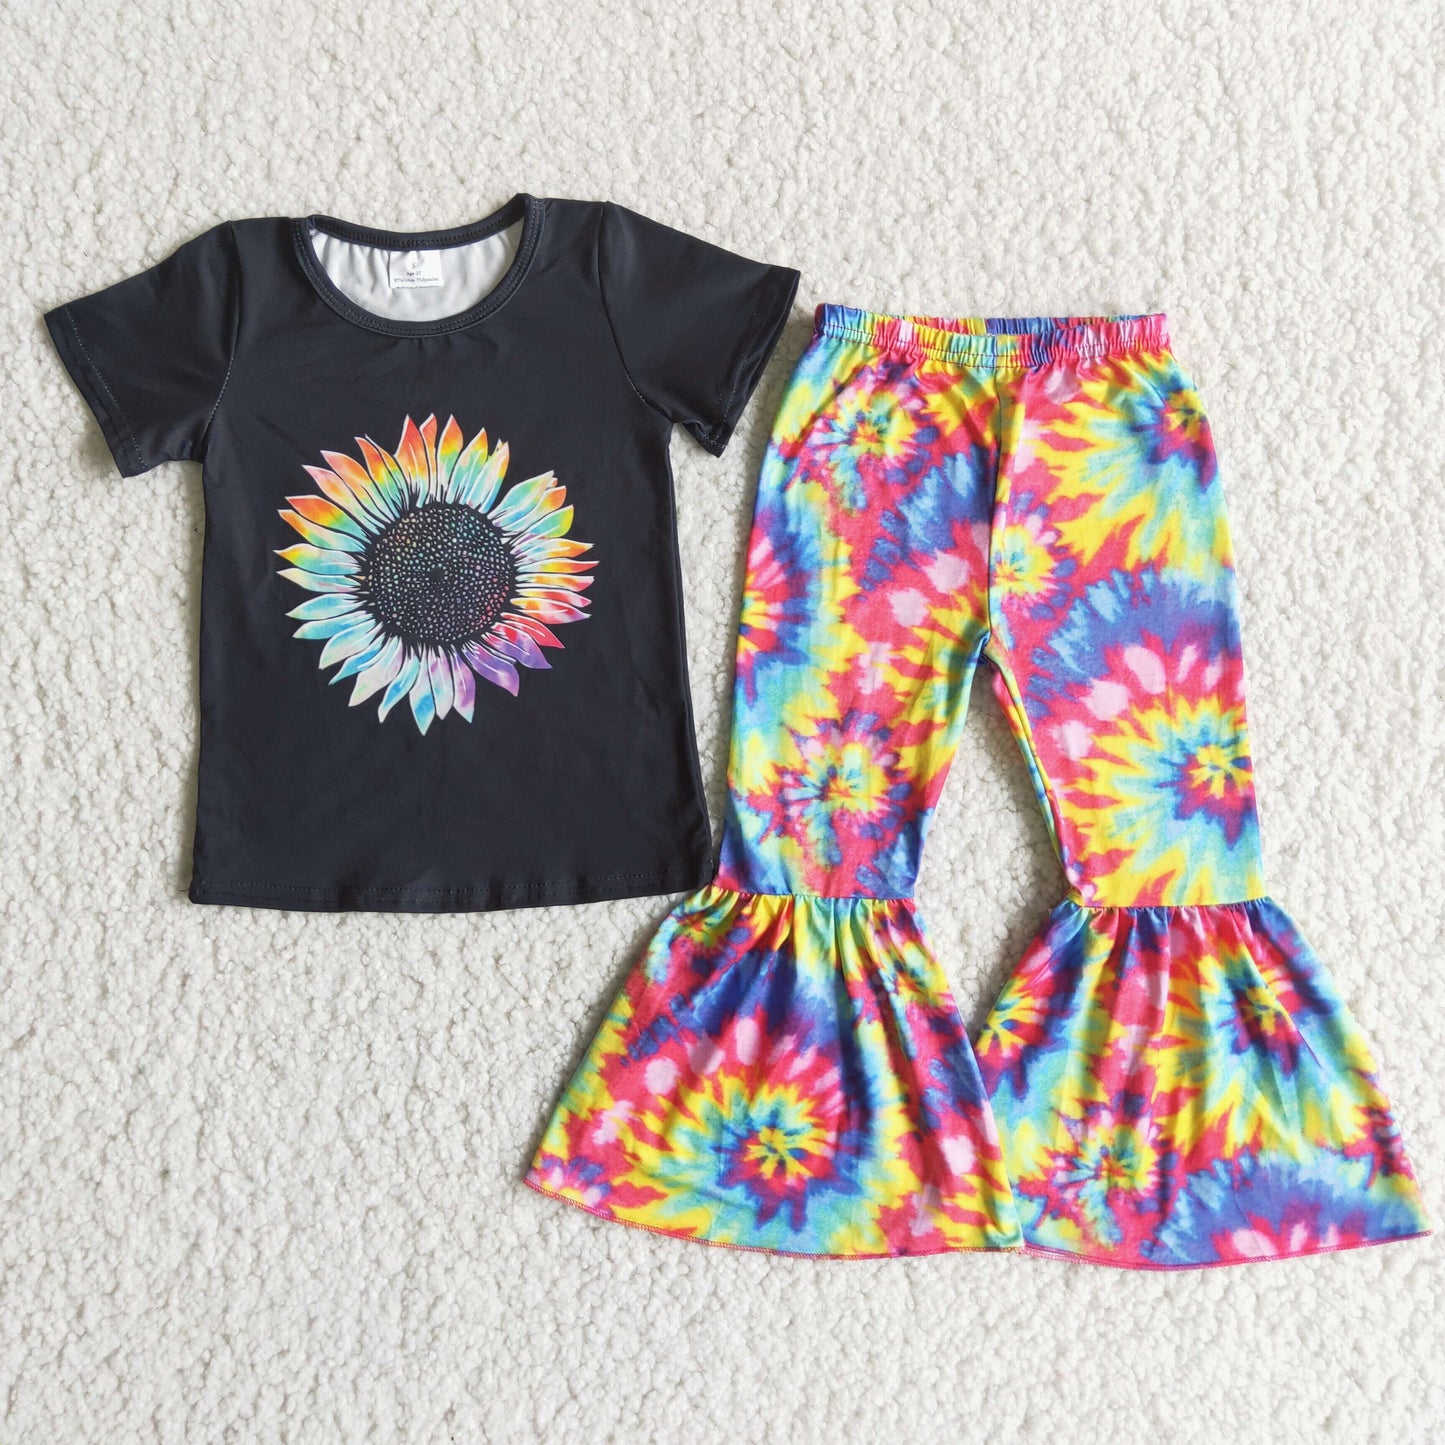 Girl Tie Dye Sunflowers Outfit